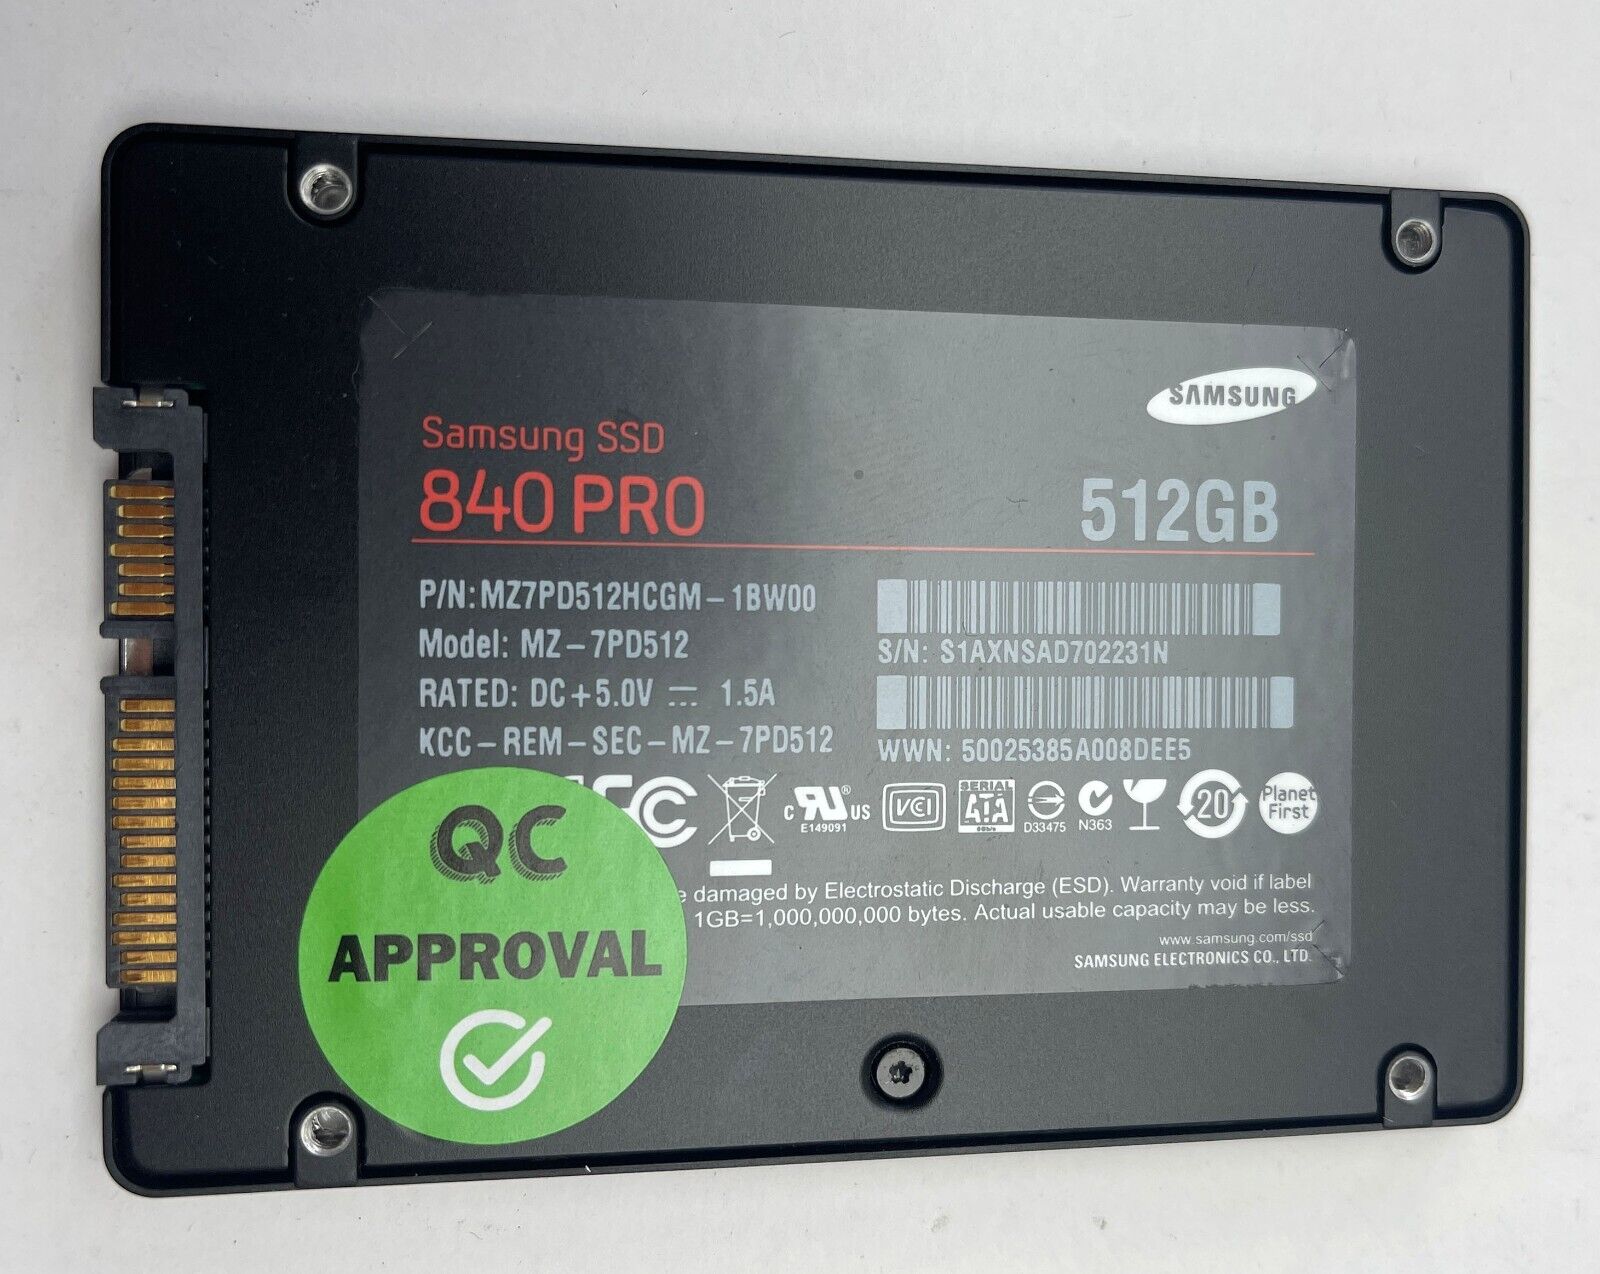 Samsung SSD 840 PRO 512 GB 2.5 6Gbps MZ-7PD512 Solid State Drive (SSD)